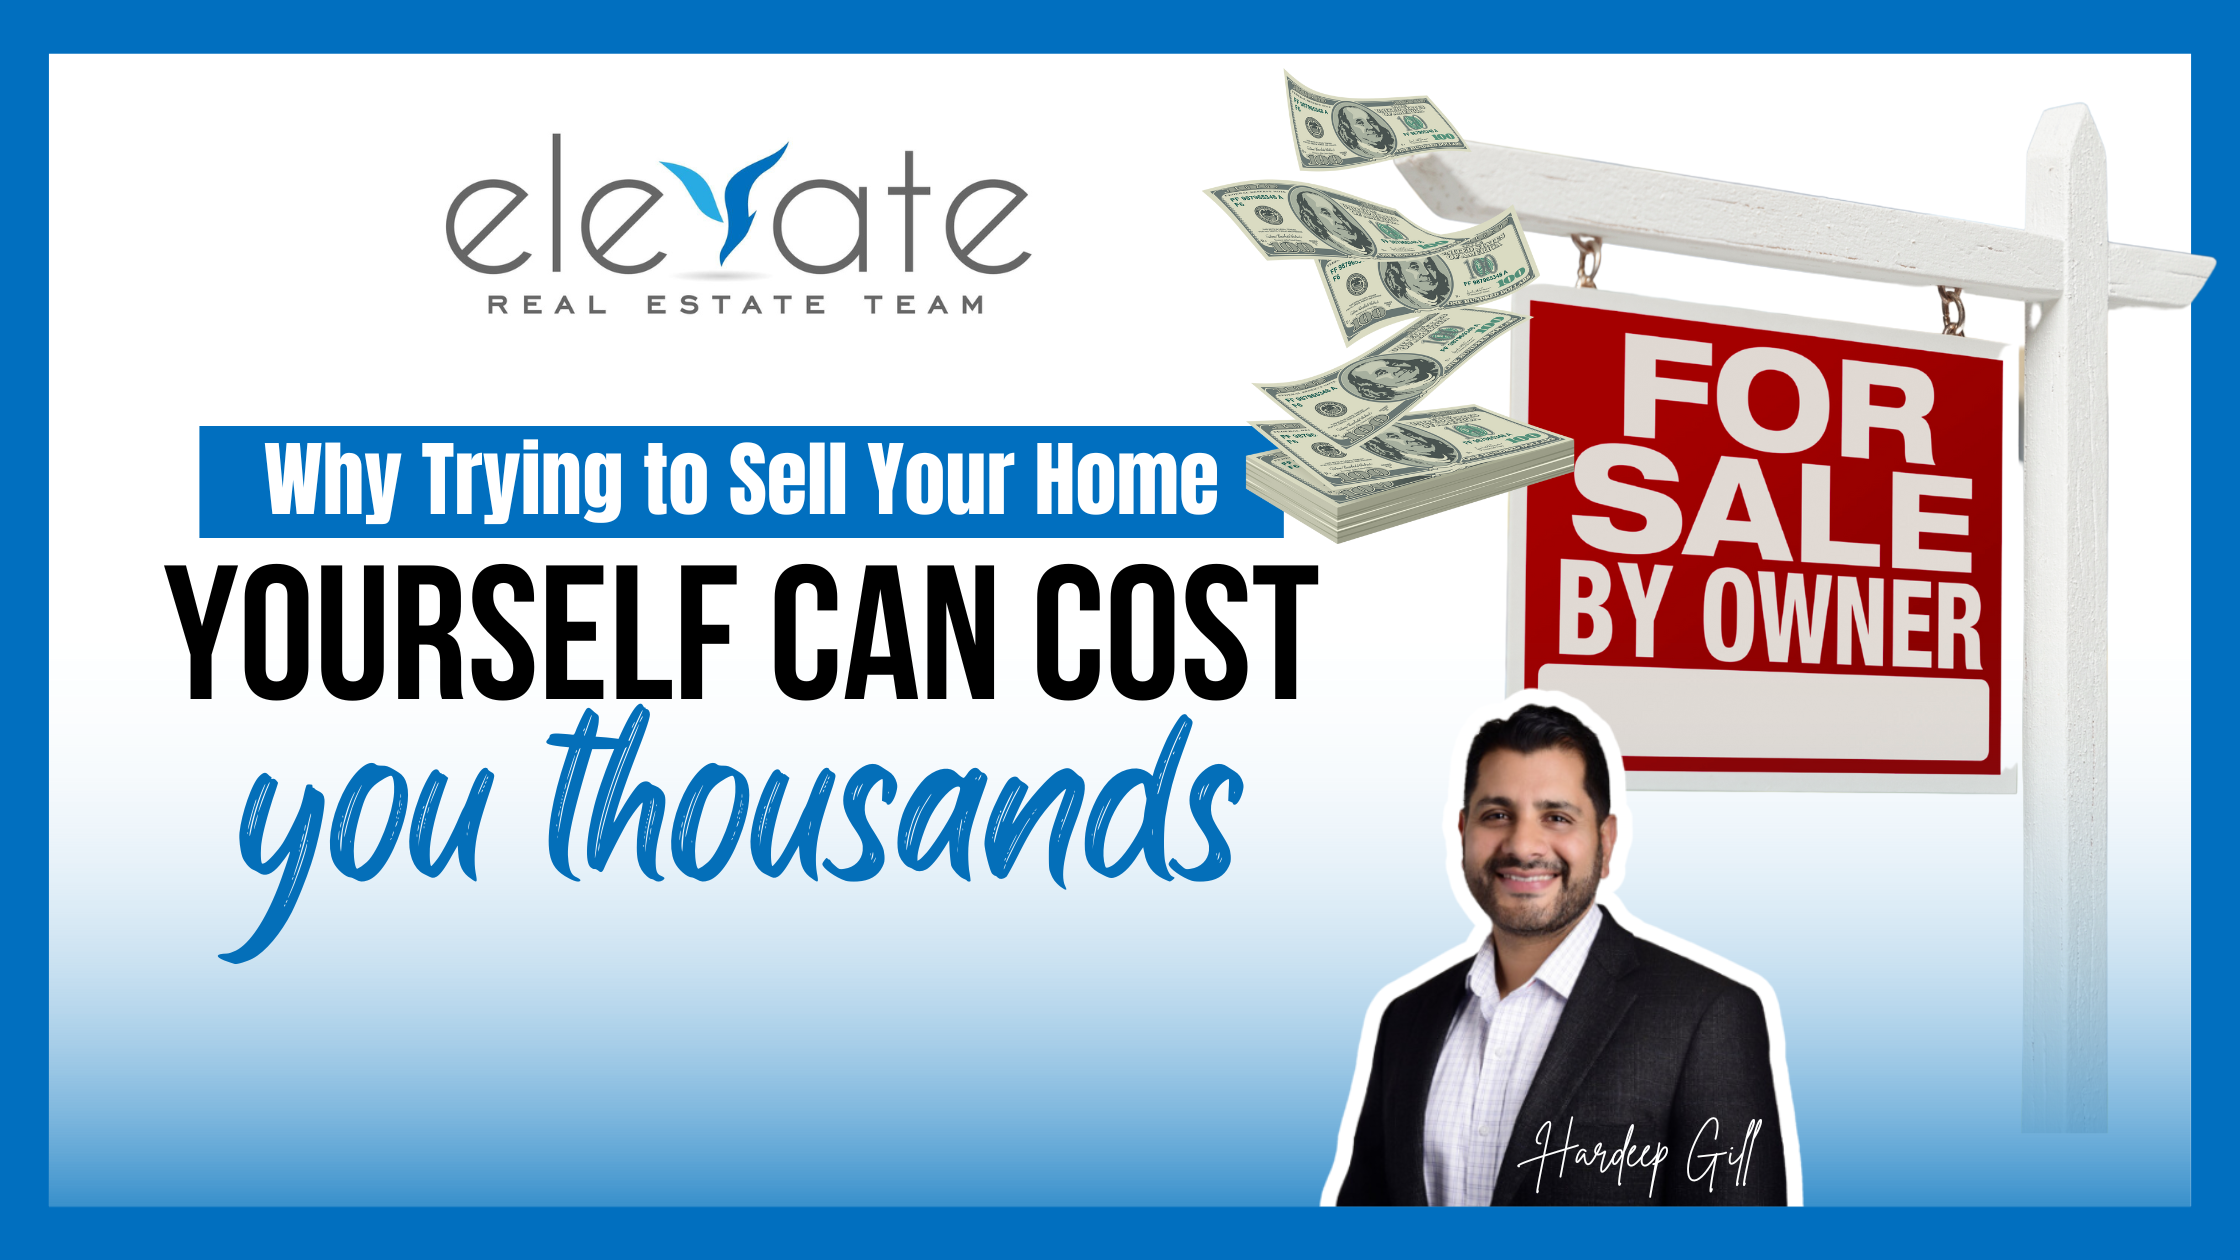 Why Trying to Sell Your Home Yourself Can Cost You Thousands